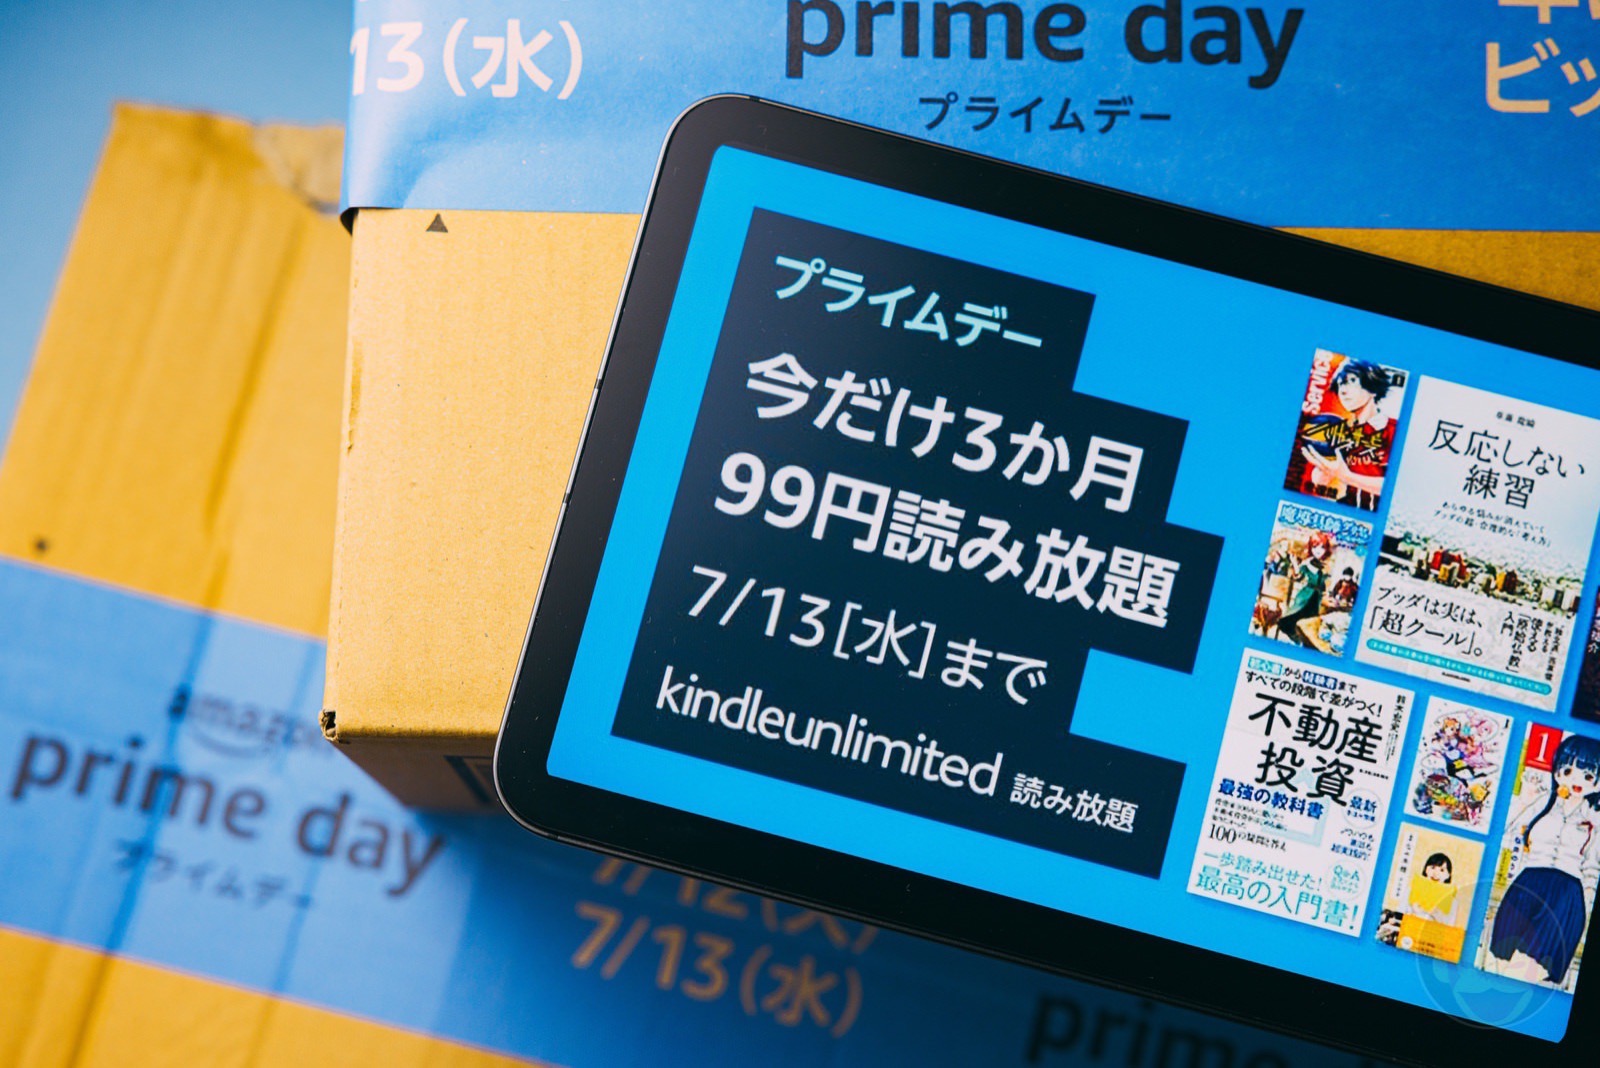 KindleUnlimited Prime Day 2022 Campaign 01